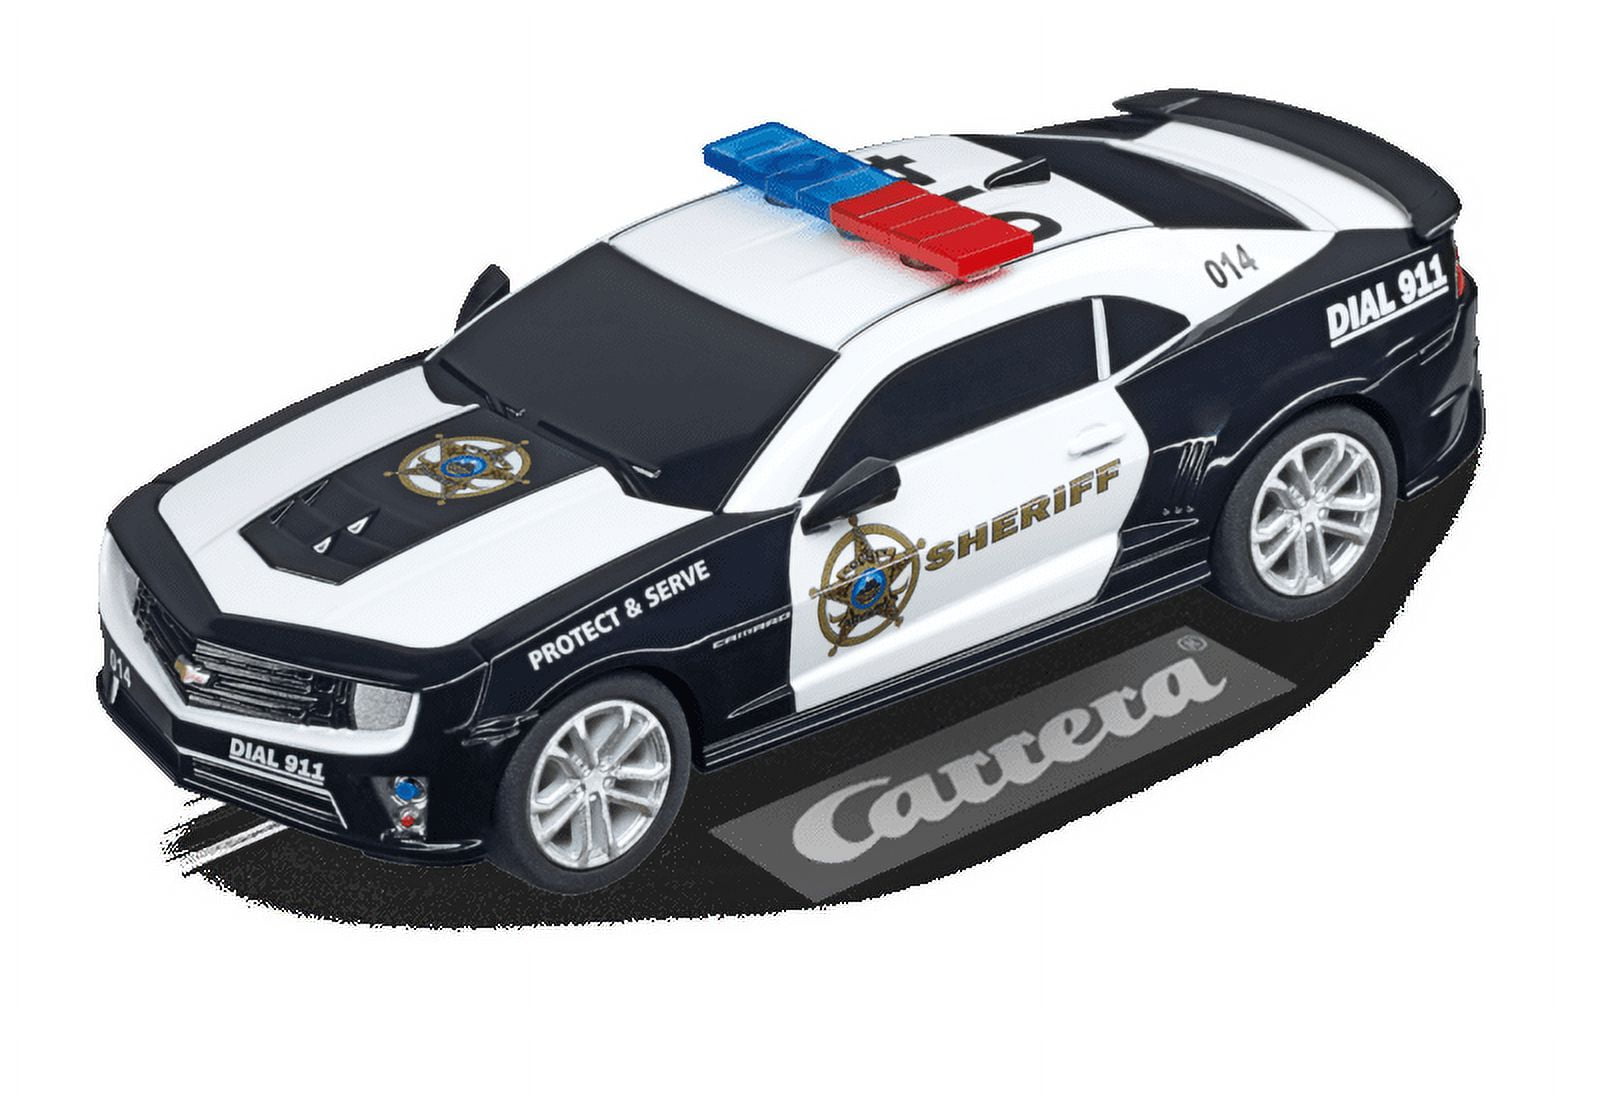 Carrera GO!!! 64146 1:43 Scale Analog Slot Car Racing Vehicle - Ford  Mustang '67 Blue 